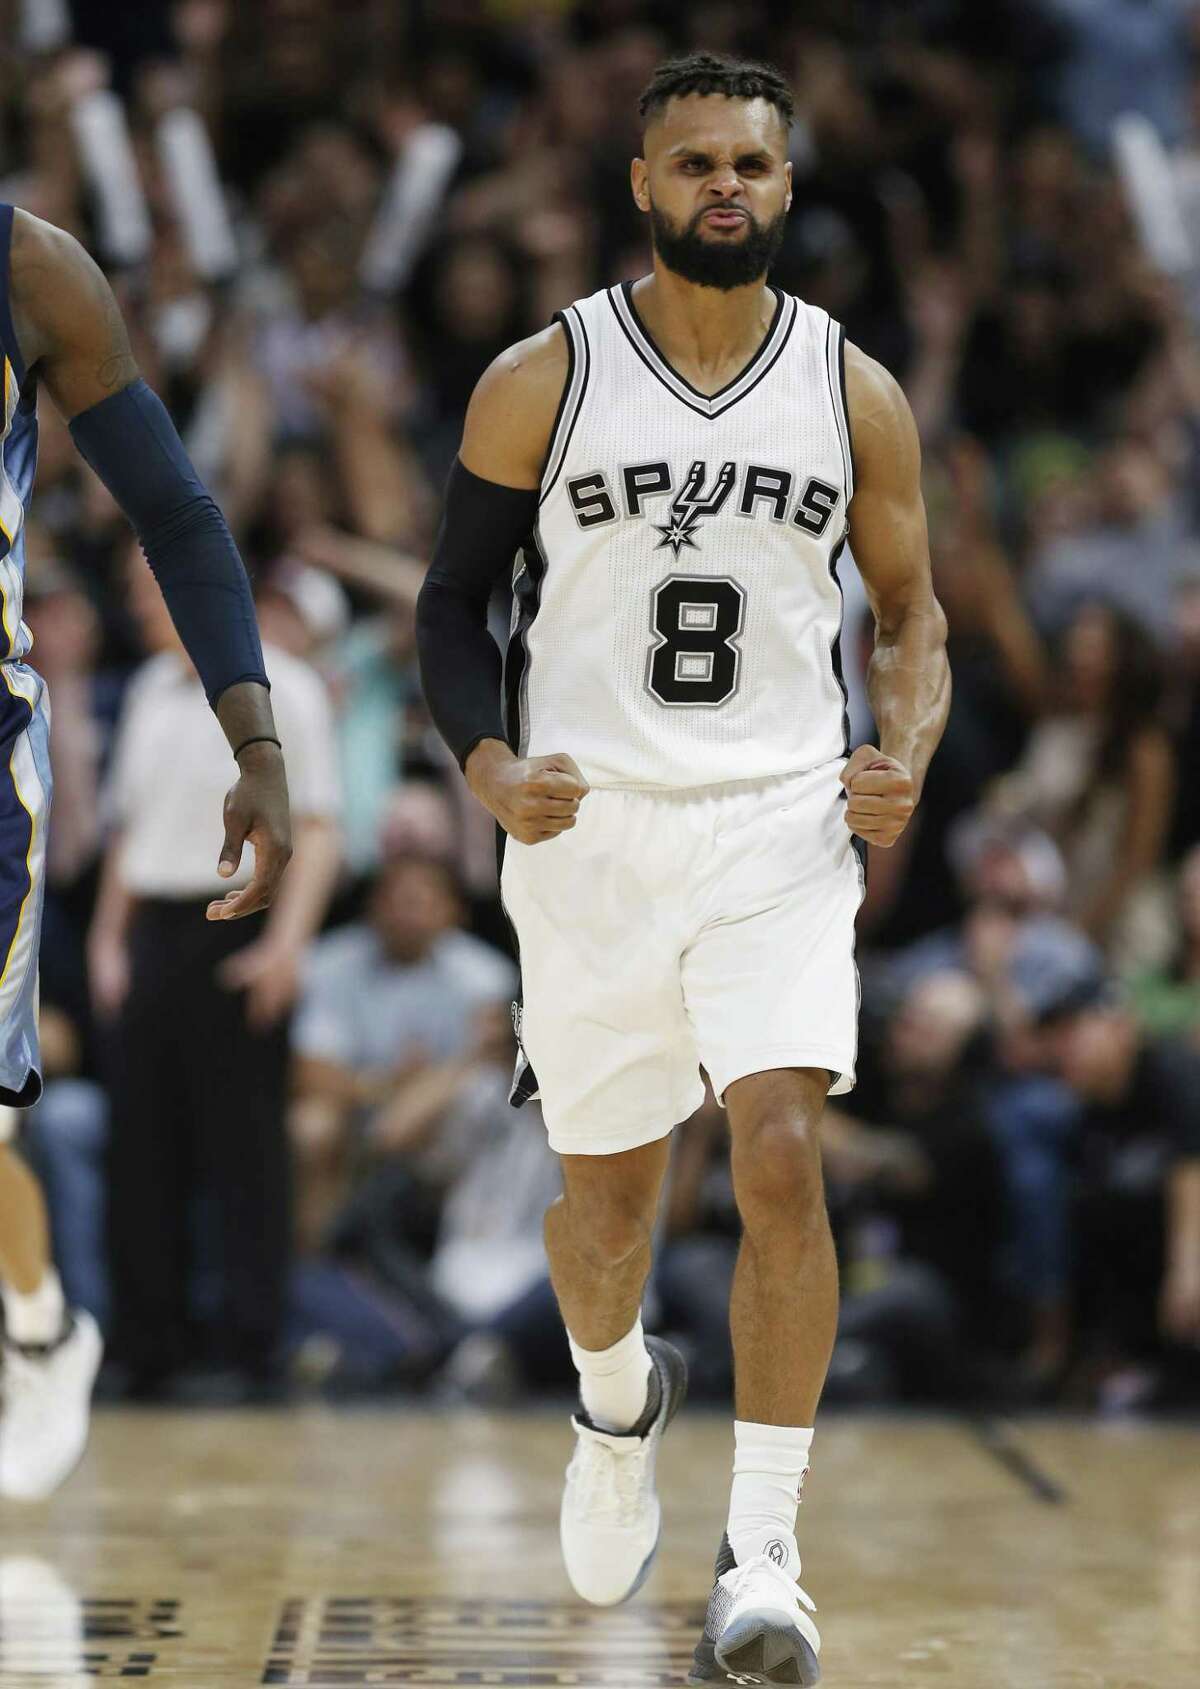 Spurs' Patty Mills (08) reacts after hitting a three-pointer against the Memphis Grizzlies during Game 5 of the Western Conference playoffs at the AT&T Center on Tuesday, Apr. 25, 2017. Spurs take Game 5, 116-103, over the Grizzlies. (Kin Man Hui/San Antonio Express-News)